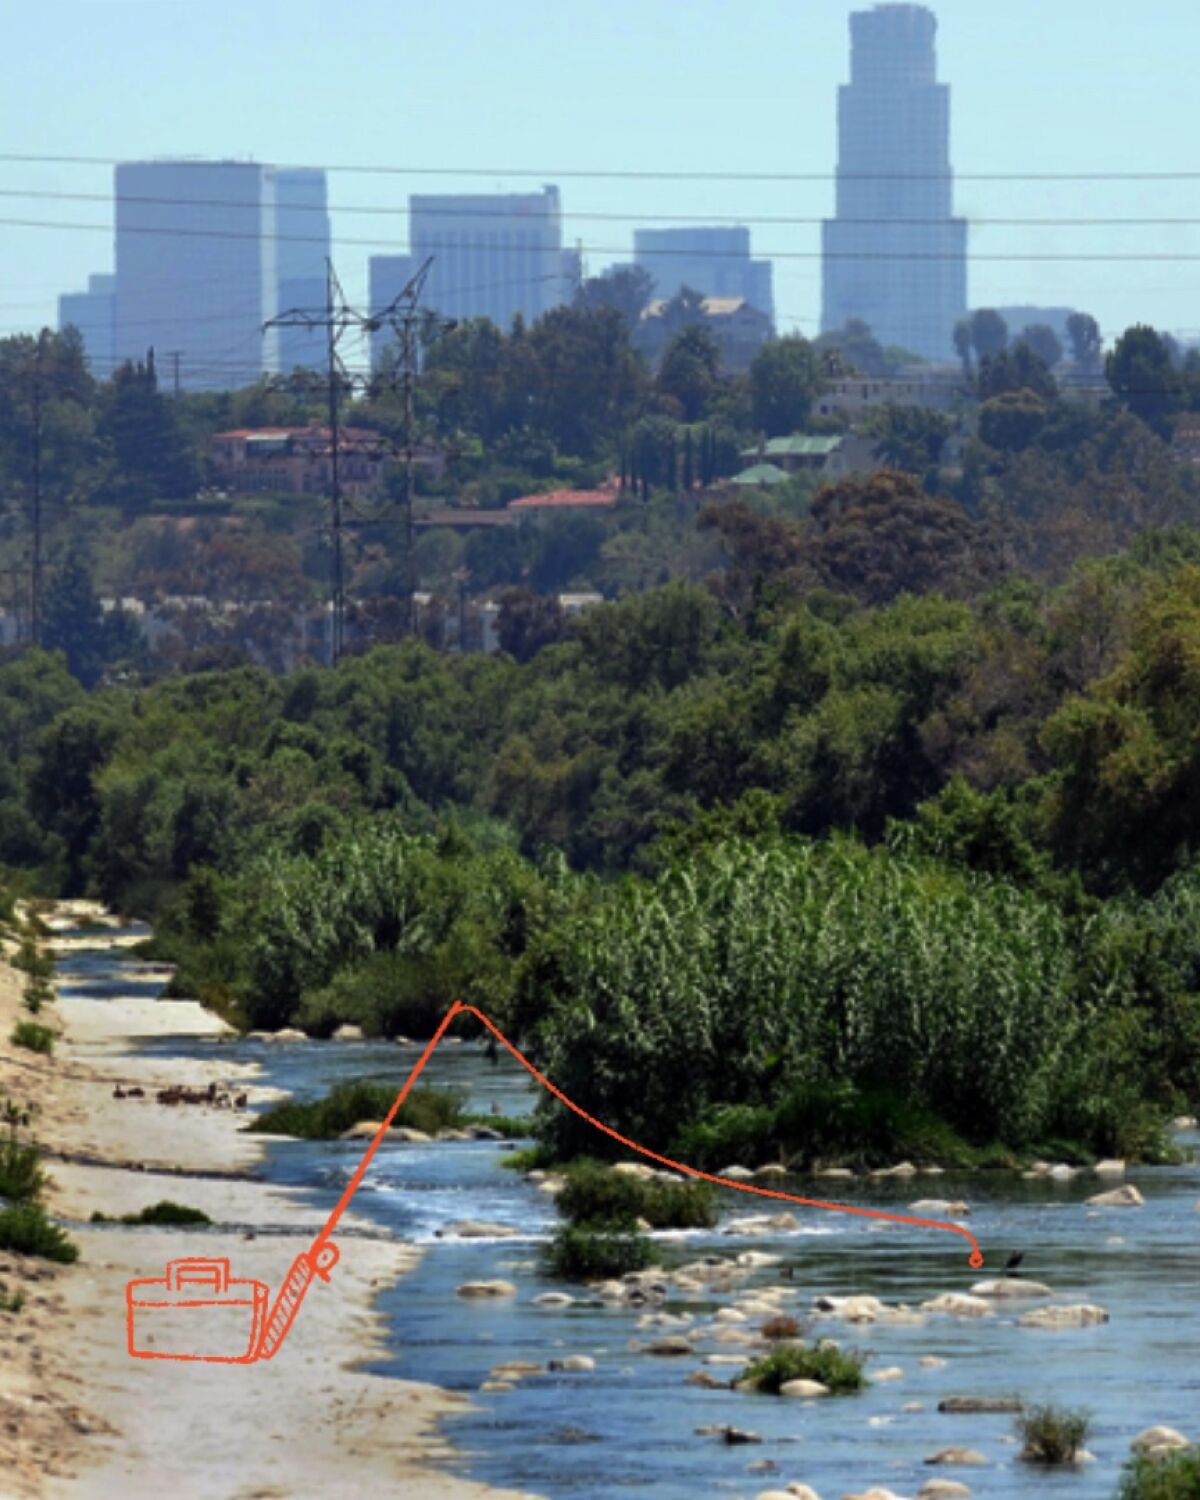 Fishing in the Los Angeles River is an easy way to get outside and escape for an afternoon.